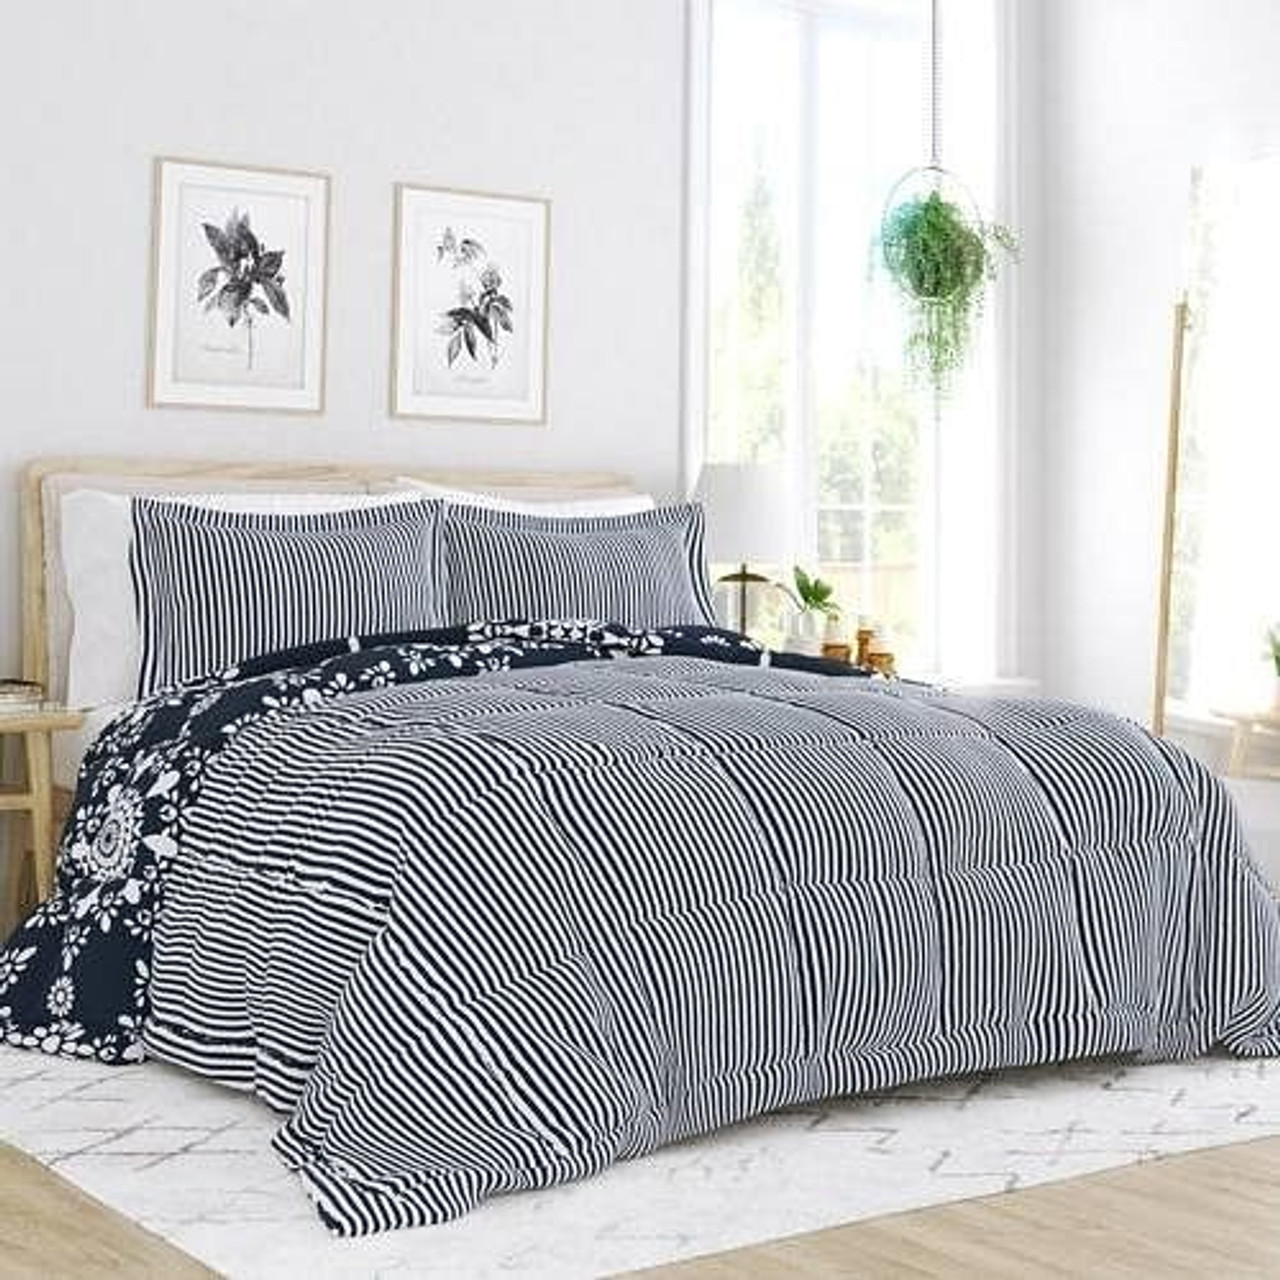 Twin size 3-Piece Navy Blue White Reversible Floral Striped Comforter Set